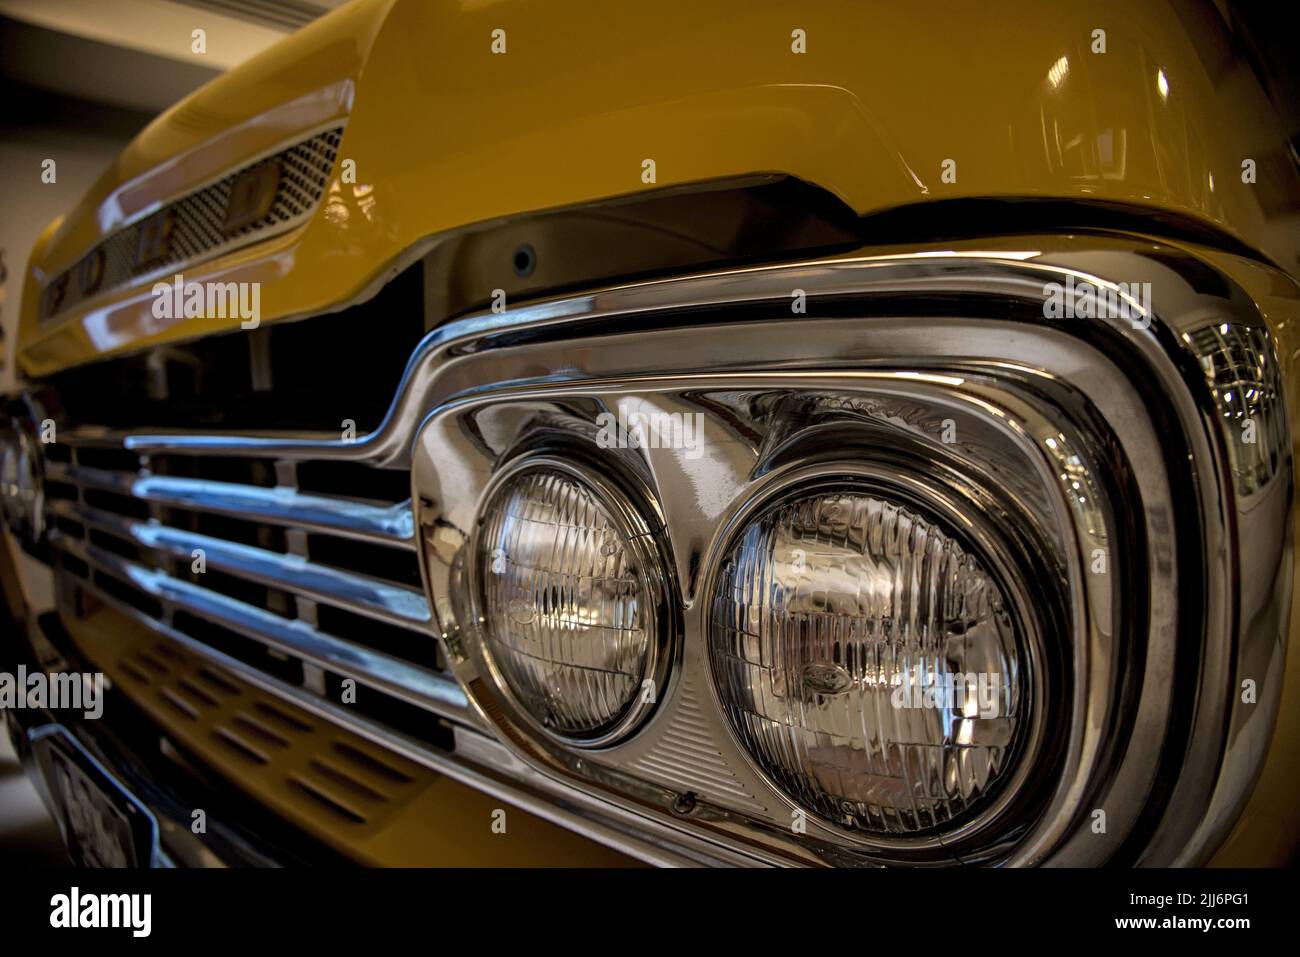 A closeup shot of the front grill of a classic yellow ford truck Stock Photo